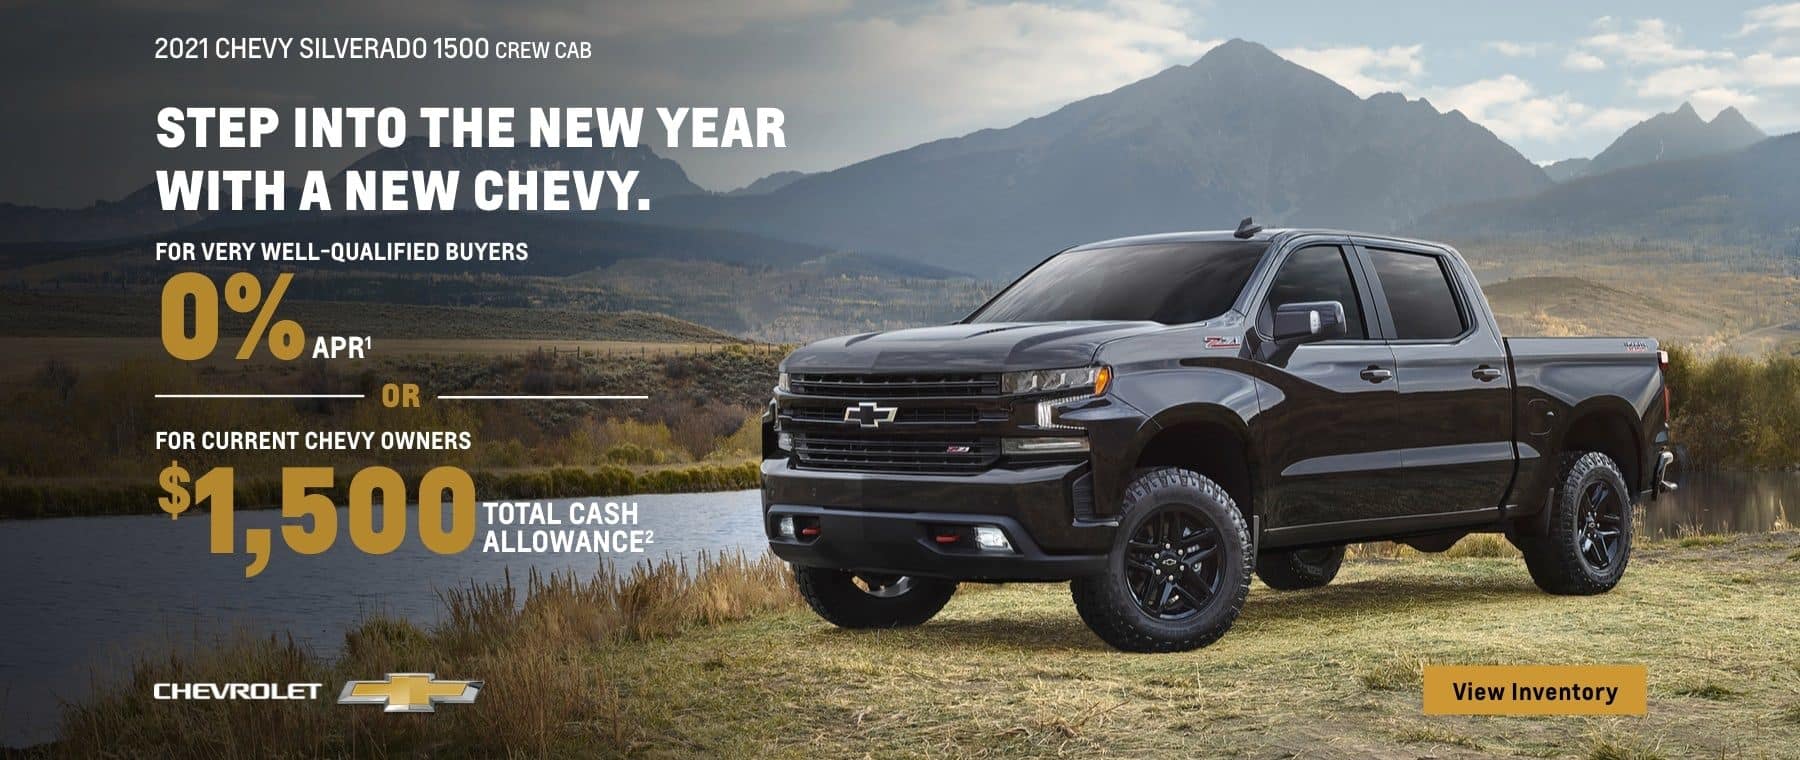 January 2022 - New Year, New Chevy